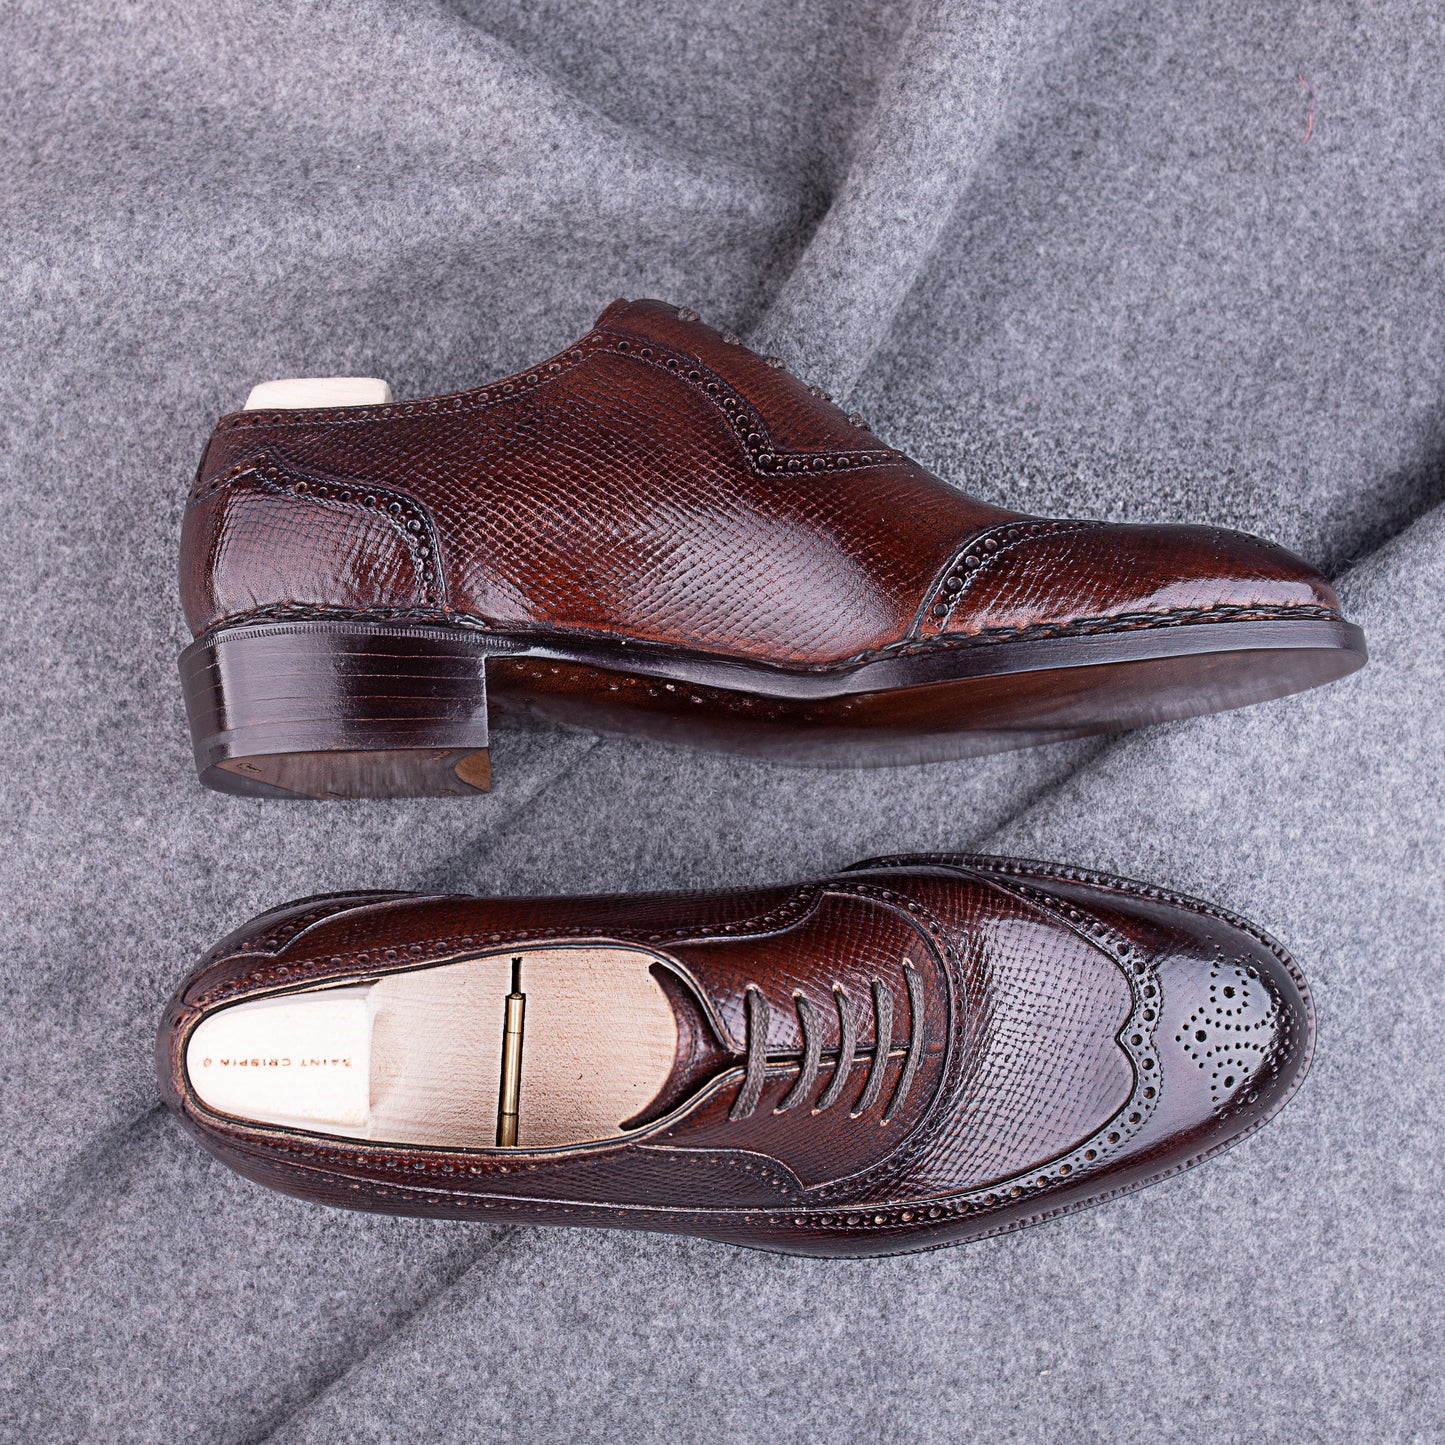 Brogued Oxford with medallion and Higher Cuban Heel